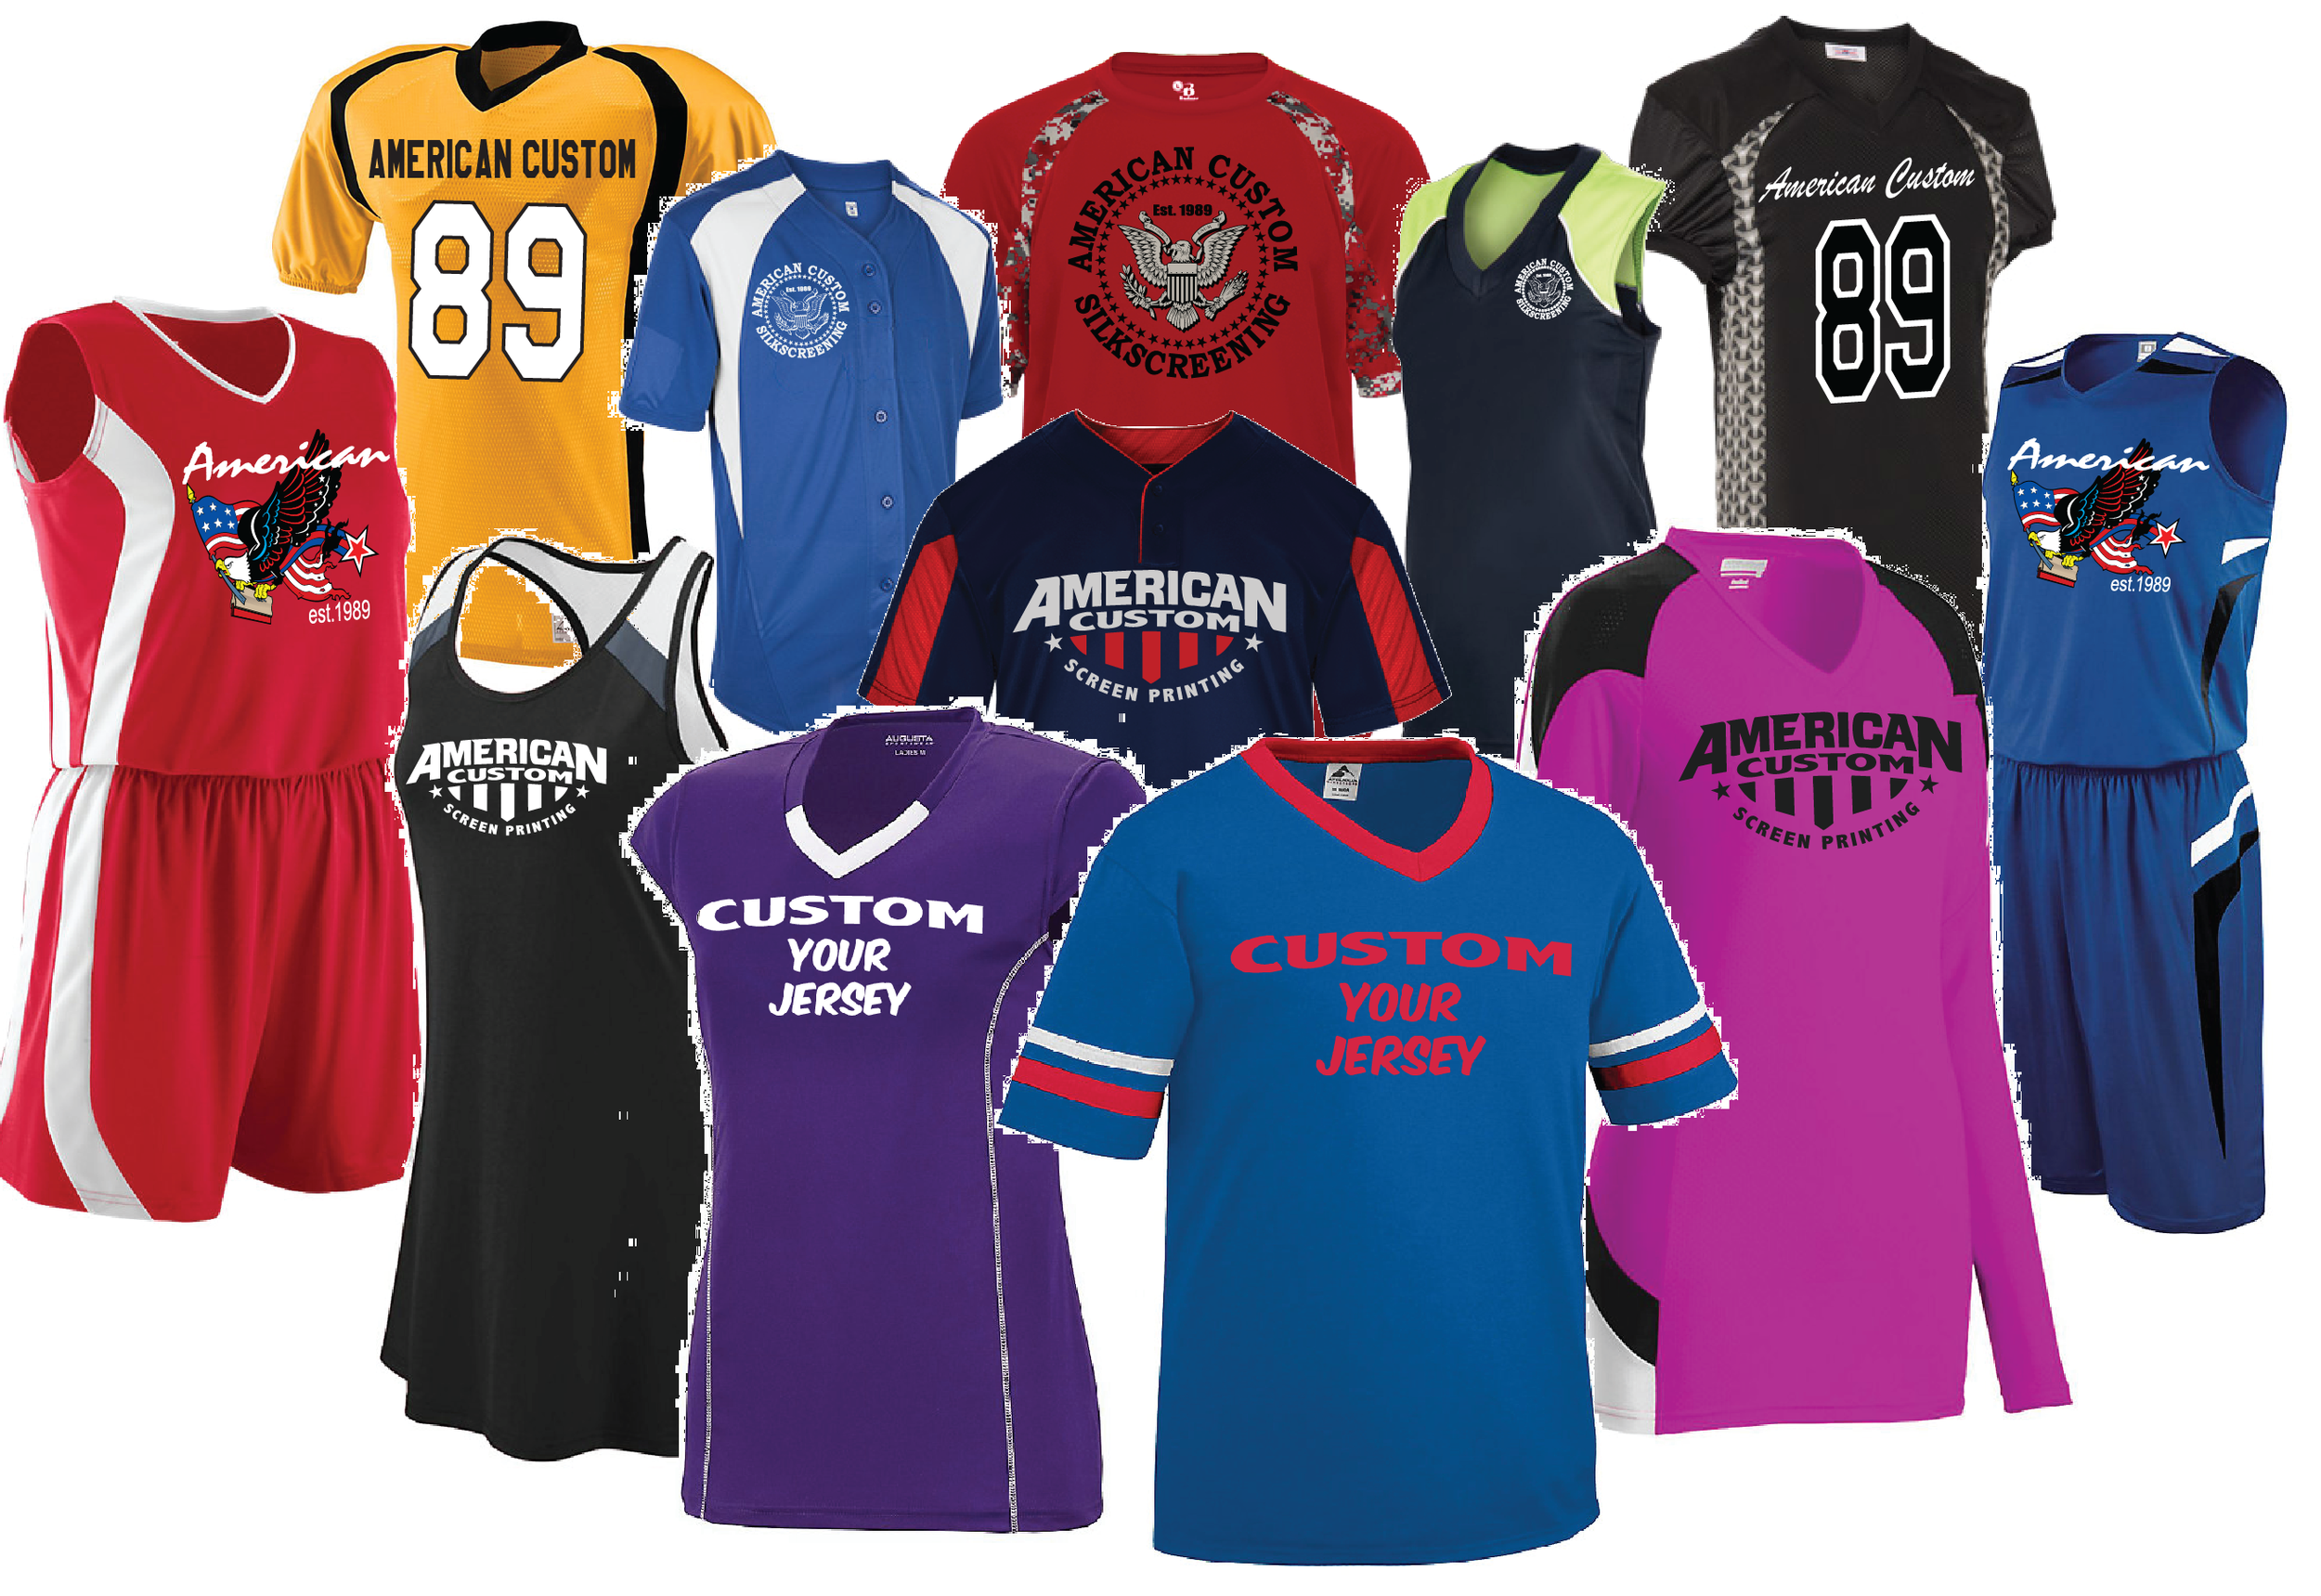 Custom Apparel, Team Uniforms, and Event Giveaways - Elevation Sports